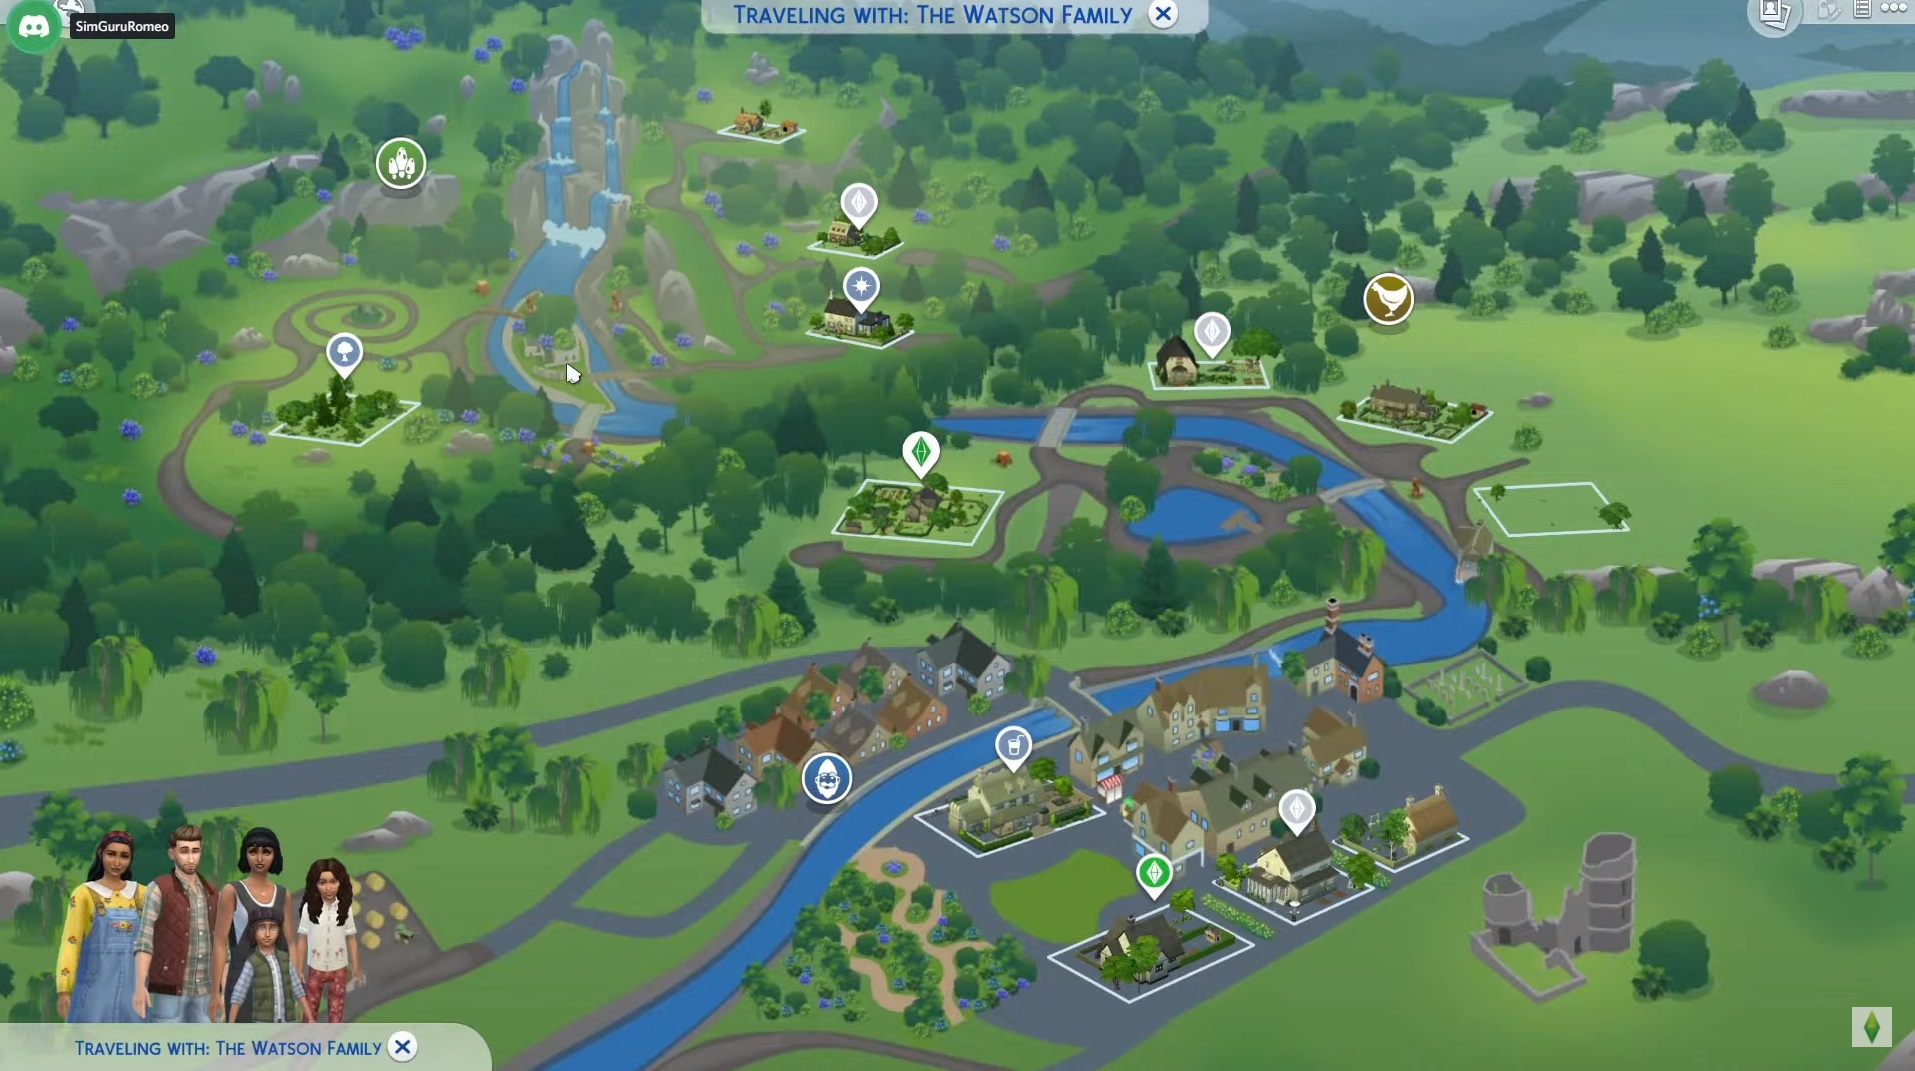 The Sims 4 Vita in Campagna Henford on Bagley